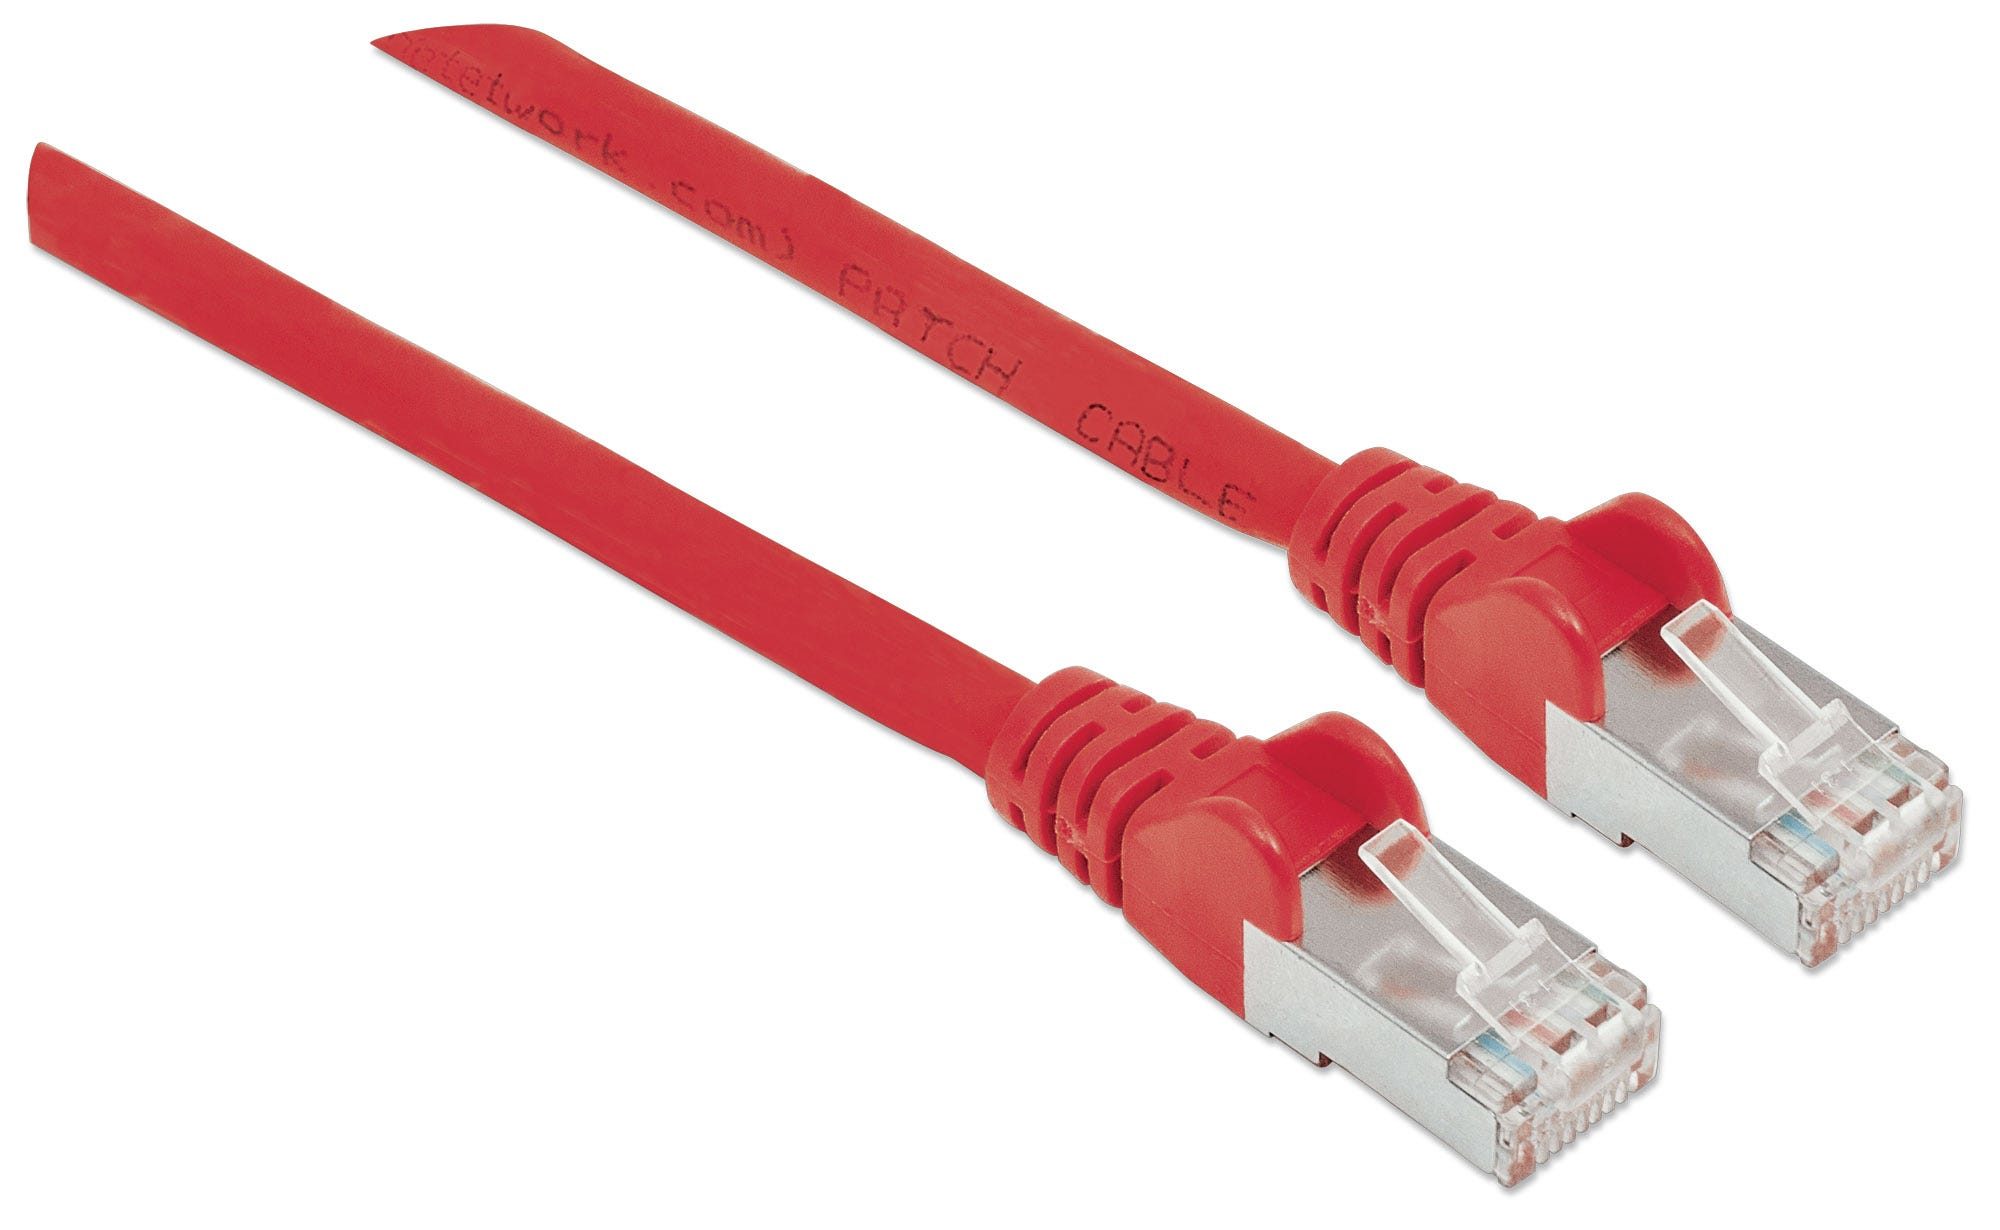 Intellinet Network Patch Cable SF/UTP Polybag PVC 1 m CCA Pink Gold Plated Contacts Snagless Booted Cat5e